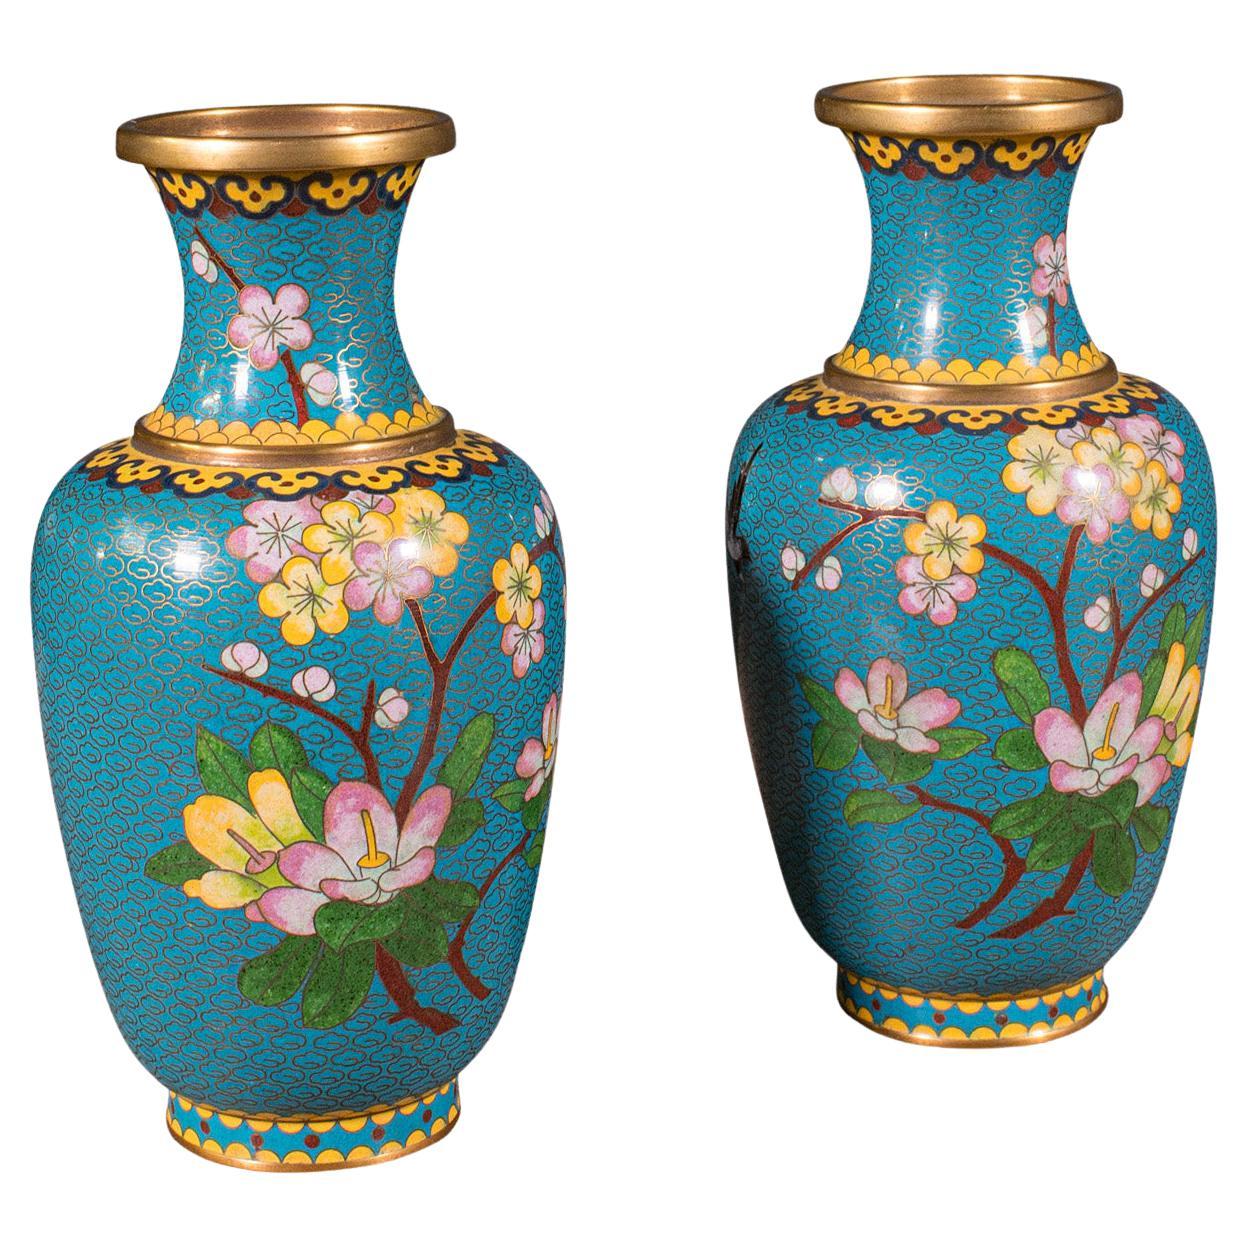 Pair Of Vintage Cloisonne Posy Vases, Chinese, Flower, Baluster, Art Deco, 1940 For Sale